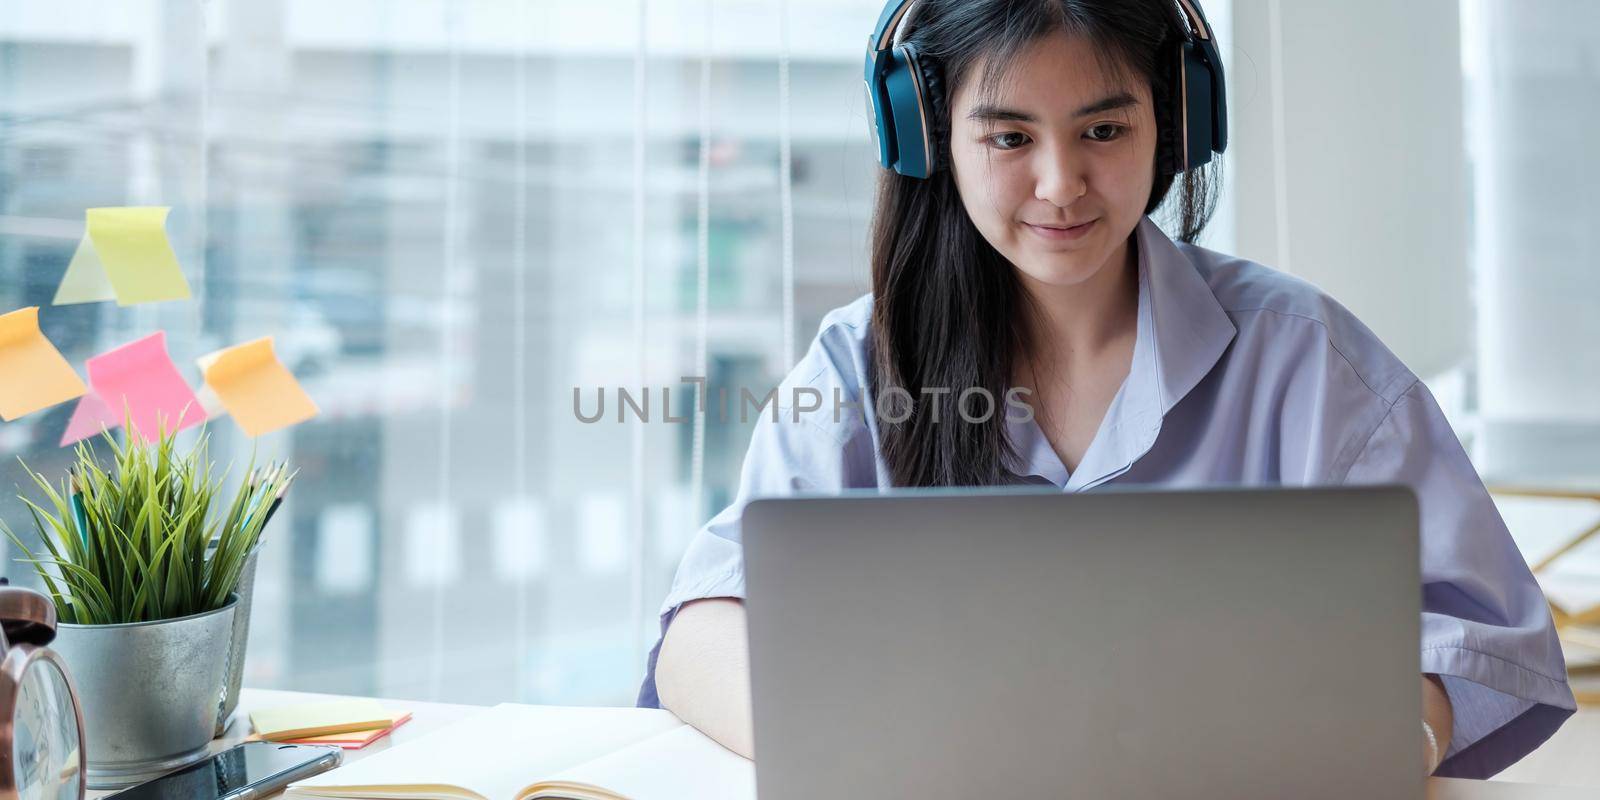 Homeschool Caucasian cute young girl student learning virtual internet online class from school teacher by remote meeting due to covid pandemic. Male teacher teaching math calculus by using whiteboard by wichayada